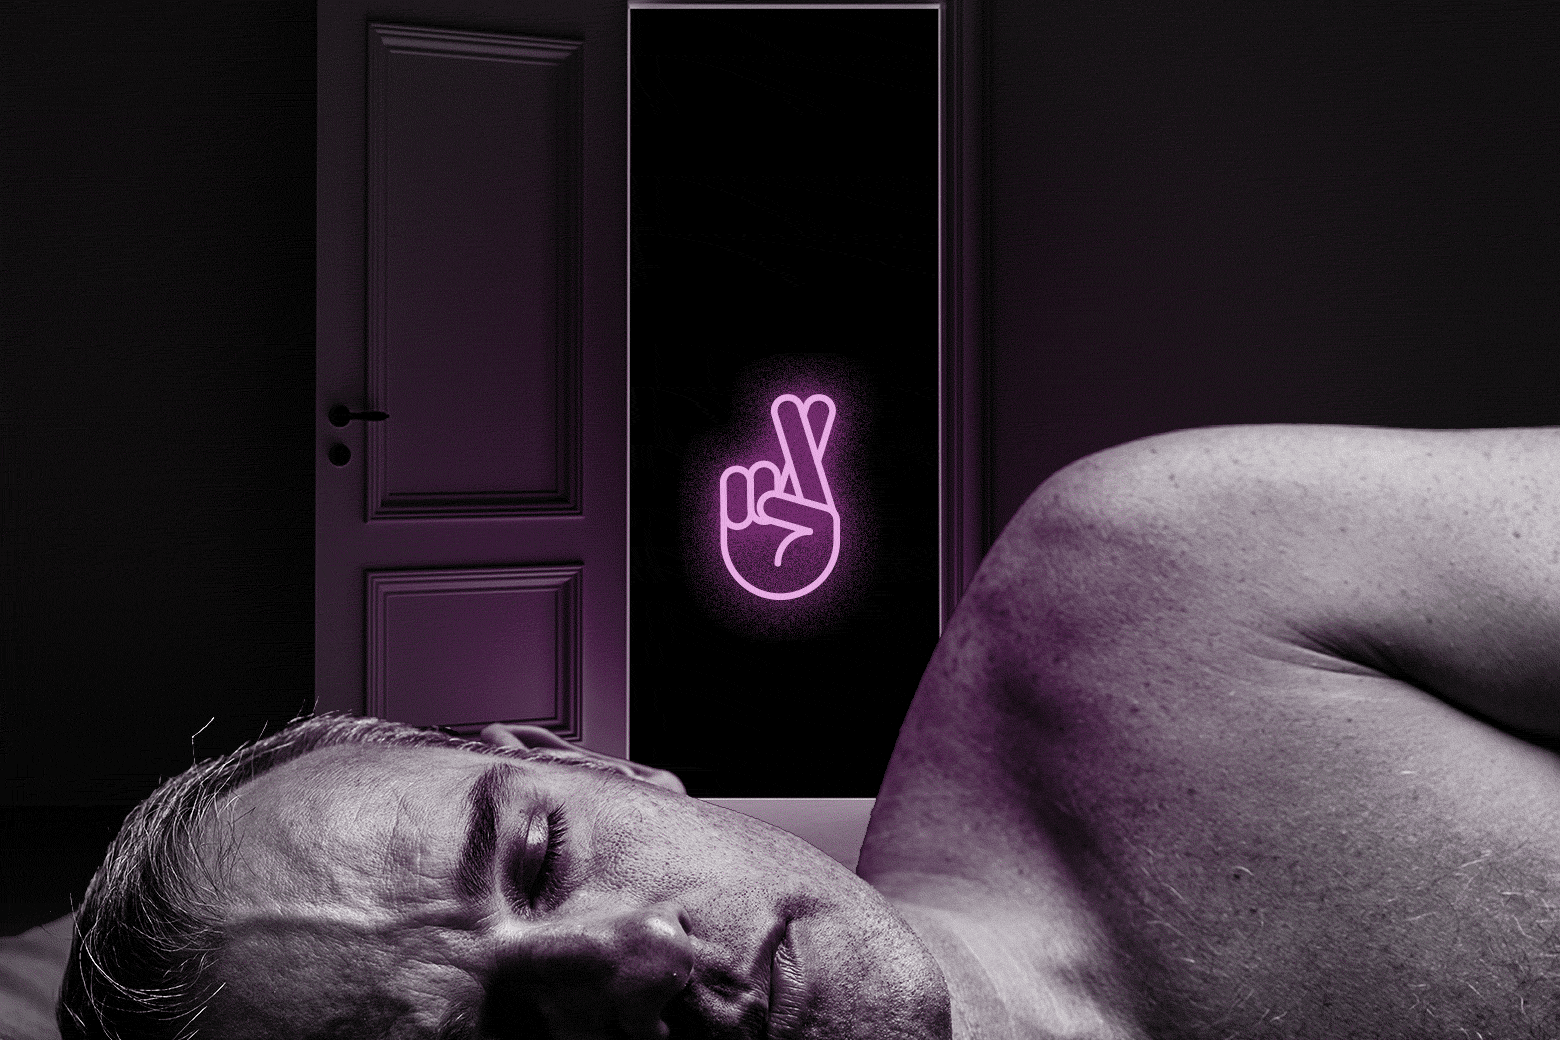 An older man lays in bed on his side, in front of a cracked door. A neon "crossed fingers" emoji floats above.